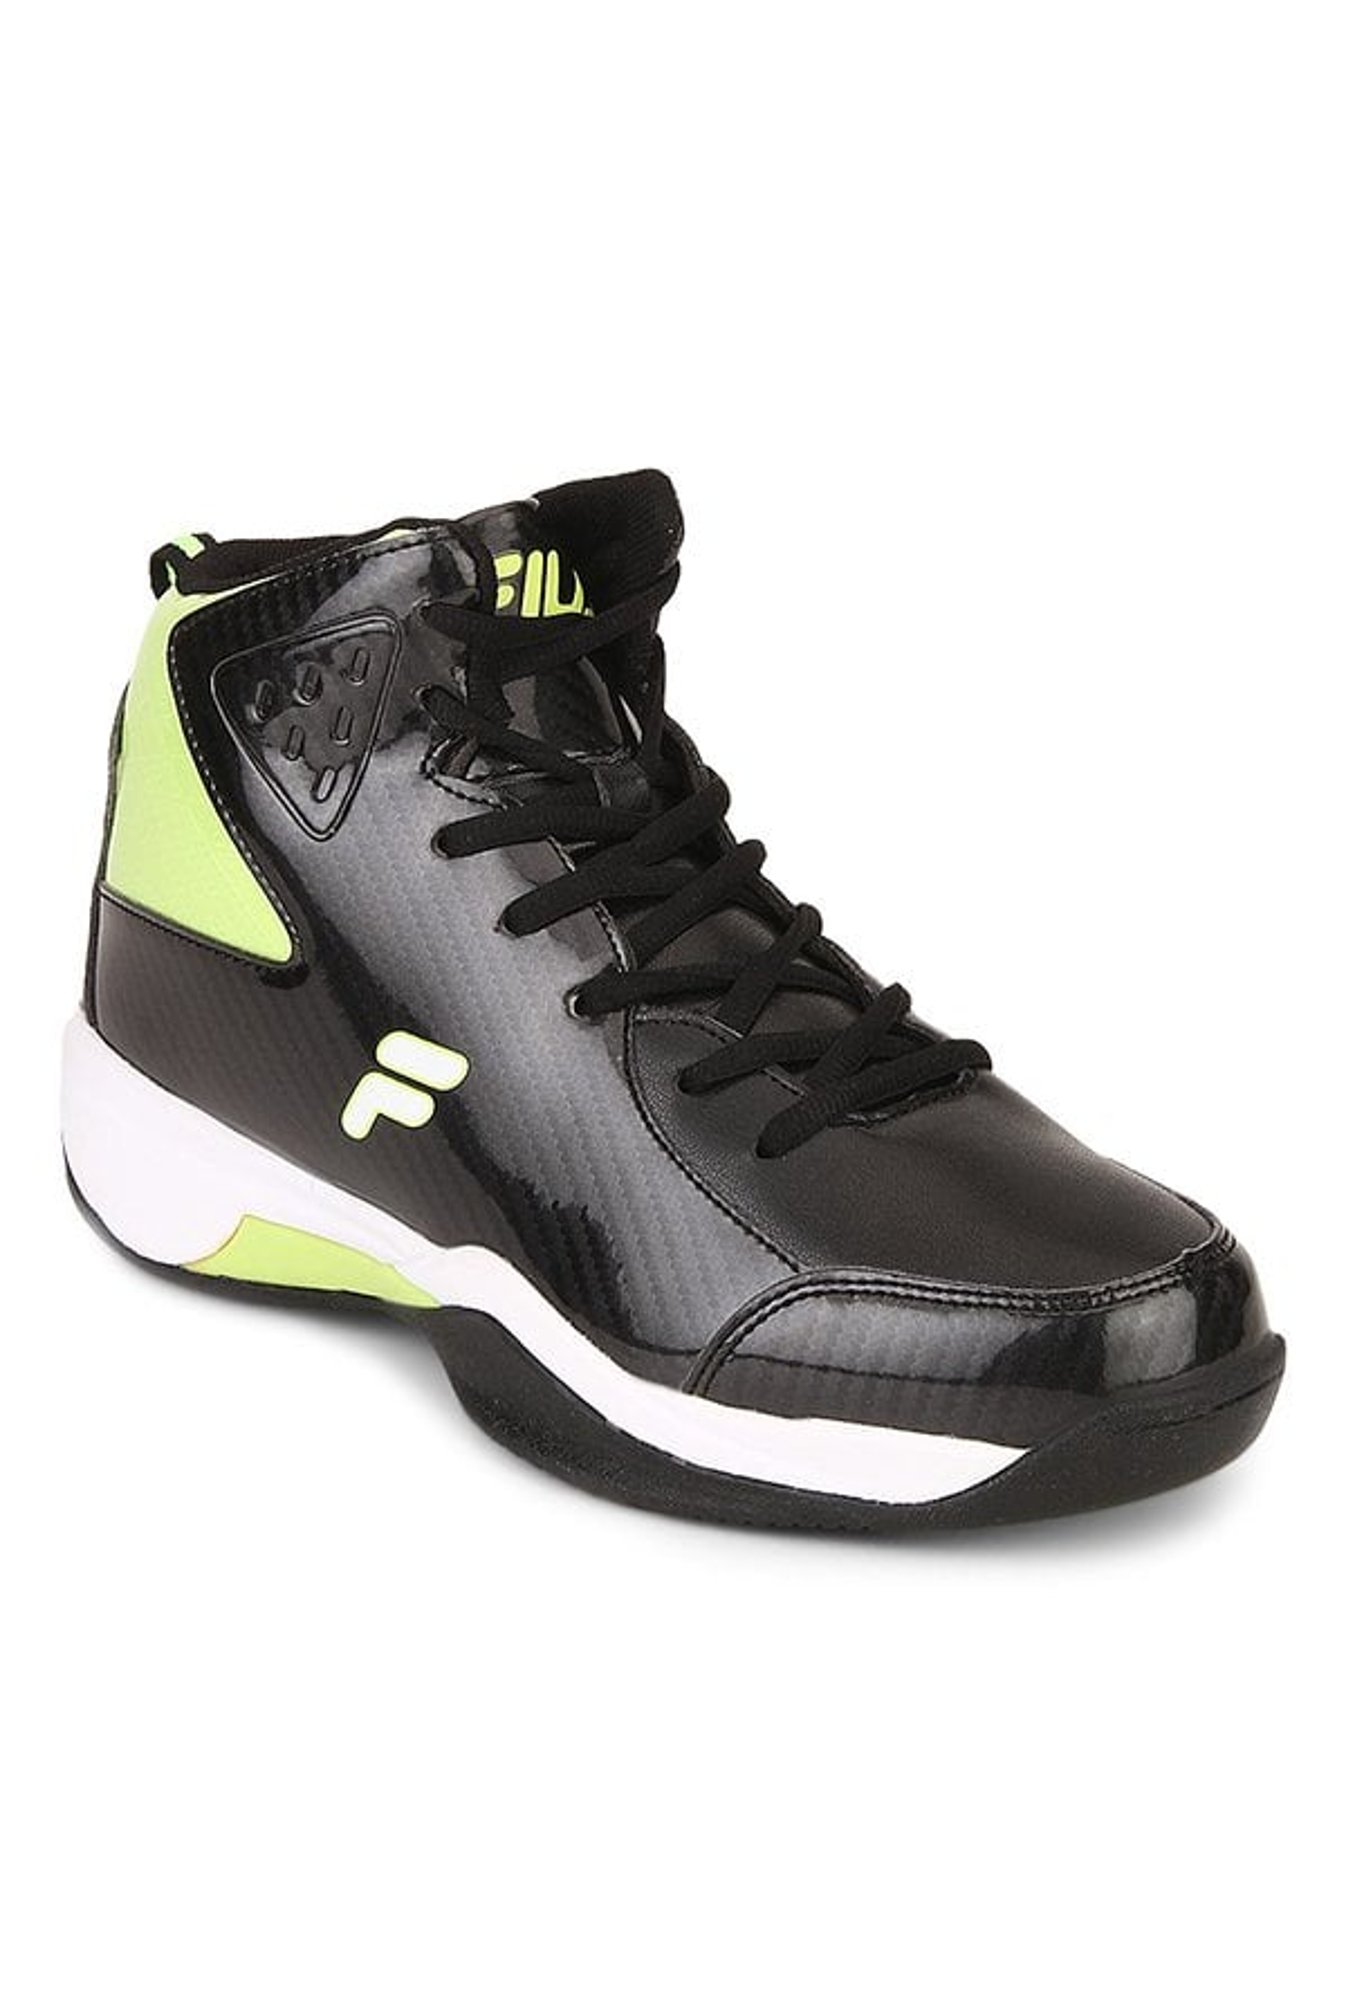 lime green and black basketball shoes